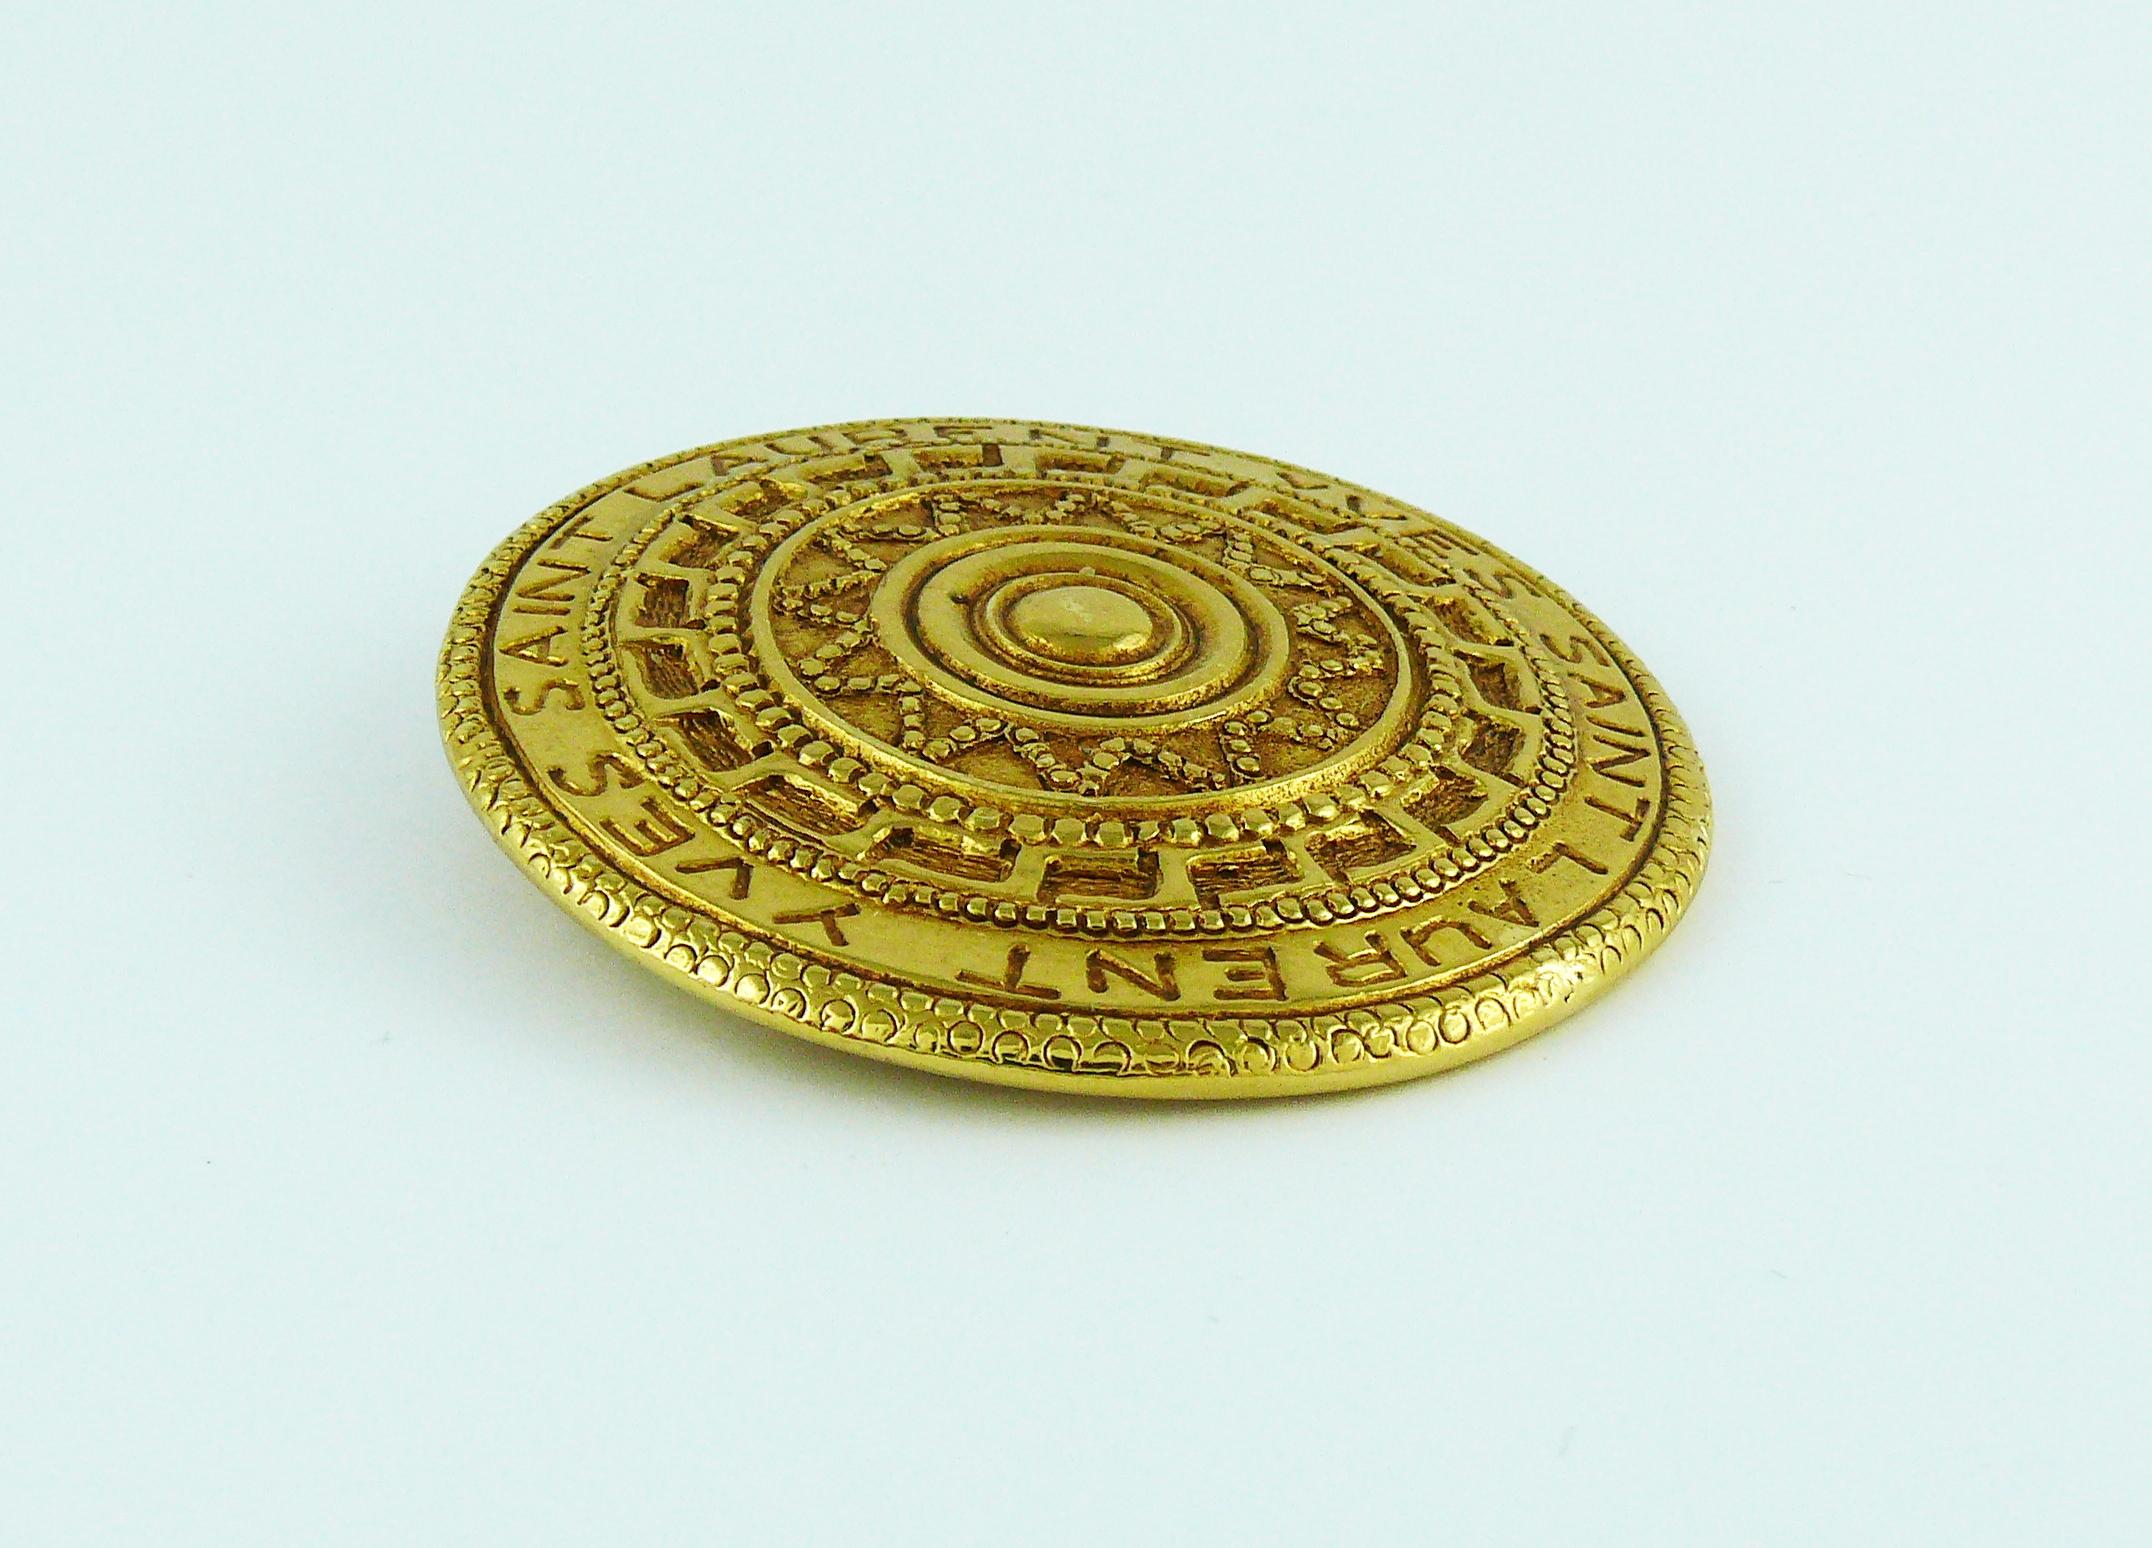 YVES SAINT LAURENT vintage gold toned shield brooch featuring ethnic Aztec pattern engraved YVES SAINT LAURENT.

Embossed YSL.
Made in France.

Indicative measurements : diameter approx. 5.4 cm (2.13 inches).

JEWELRY CONDITION CHART
- New or never